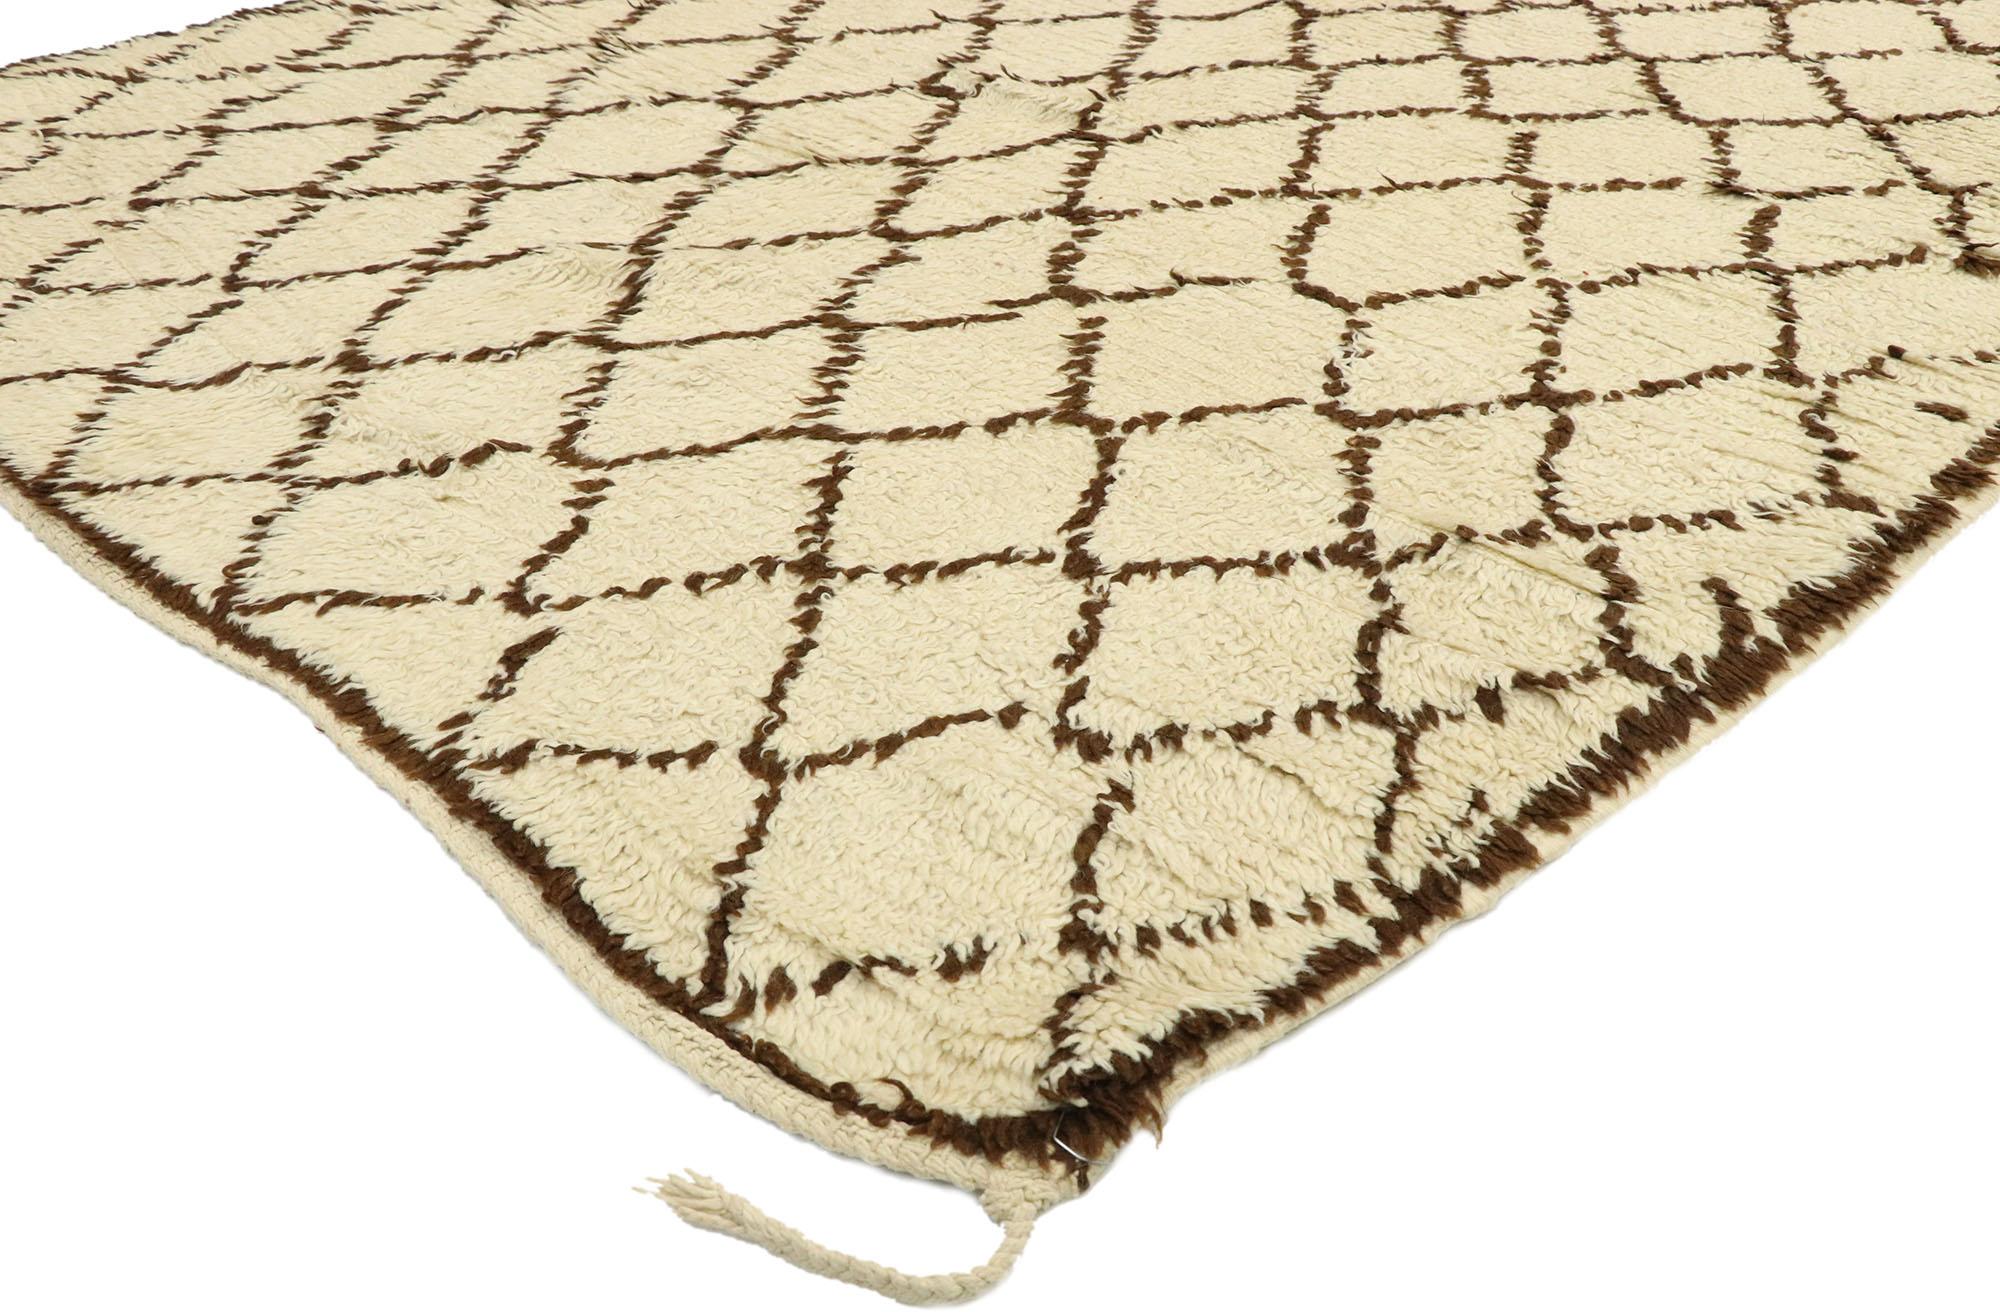 74830, vintage Berber Moroccan rug with modern style. This hand knotted wool vintage Moroccan rug features contrasting dark brown lines running the length of the beige field. The asymmetrical lines criss cross in an organic manner, creating a